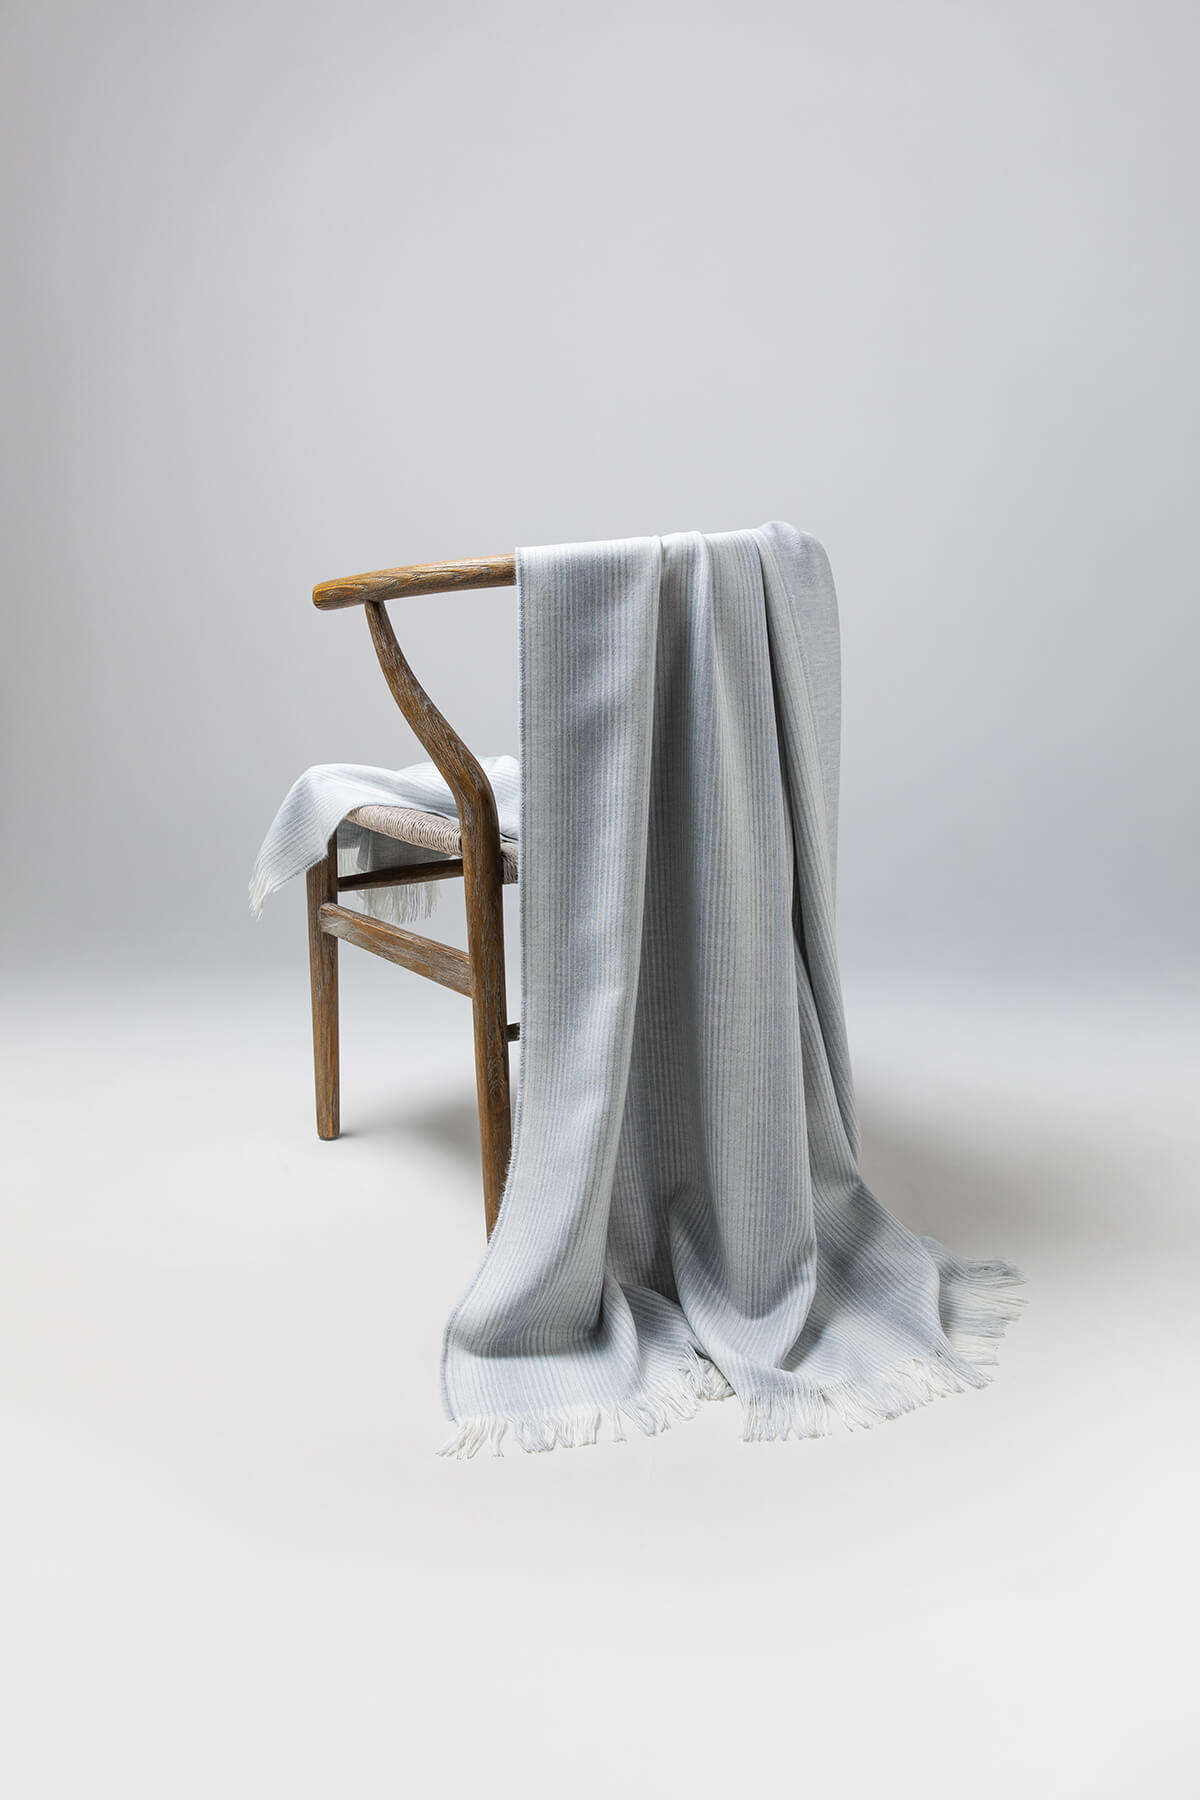 Johnstons of Elgin’s Silver & White Ombre Stripe Merino Throw on brown chair on a grey background WD000257RU6990ONE